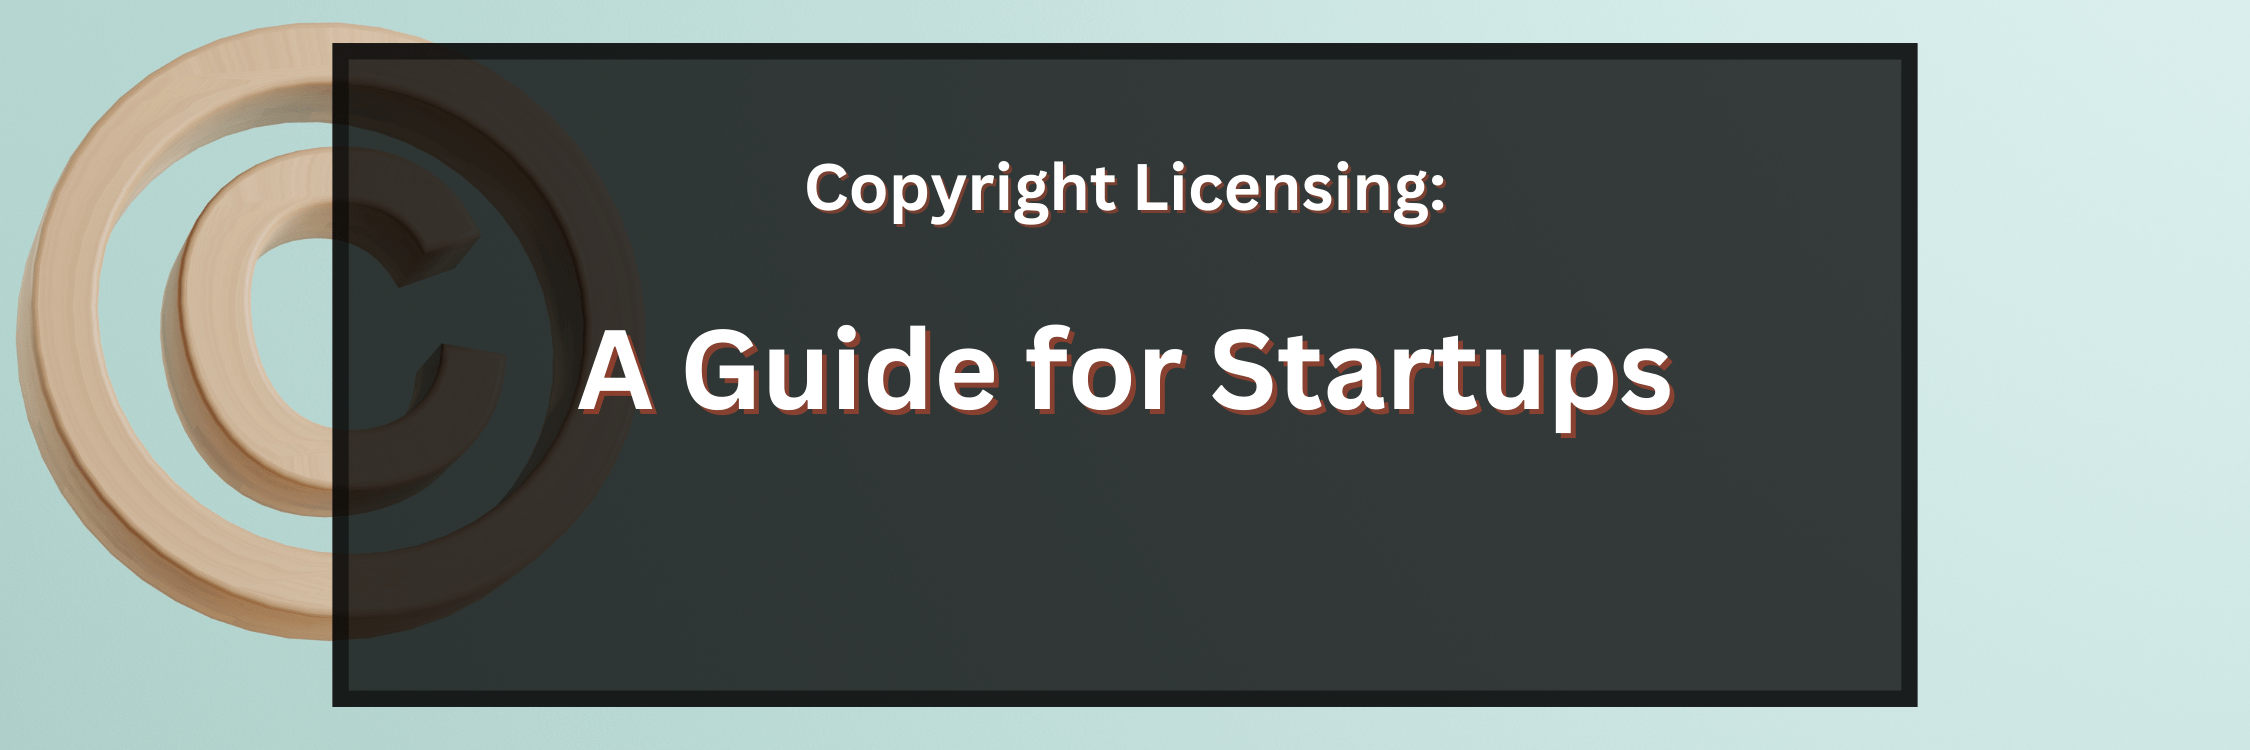 Copyright Licensing A Guide For Startups